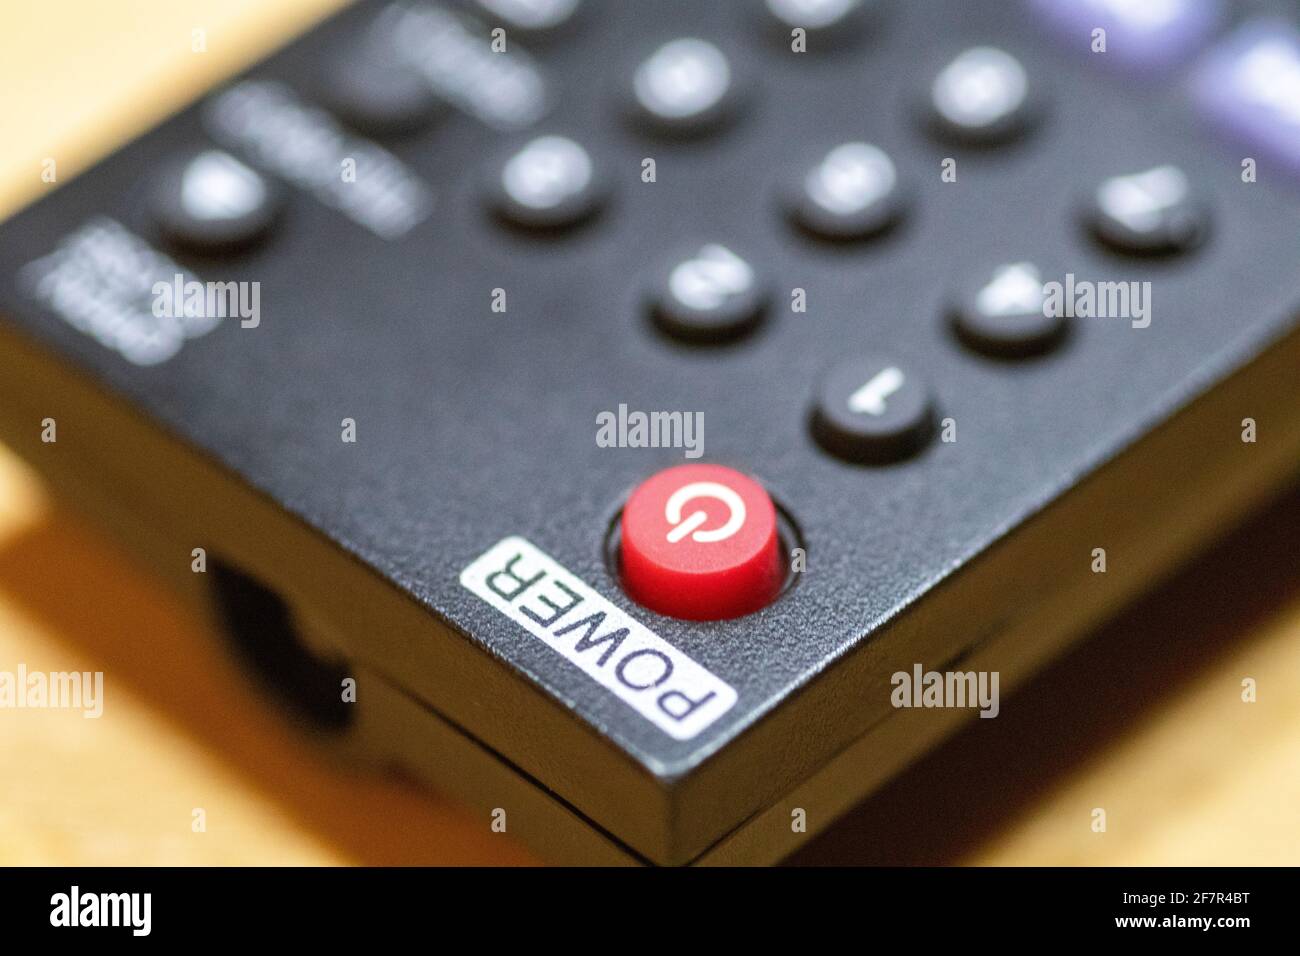 Red power button close-up on TV remote control Stock Photo